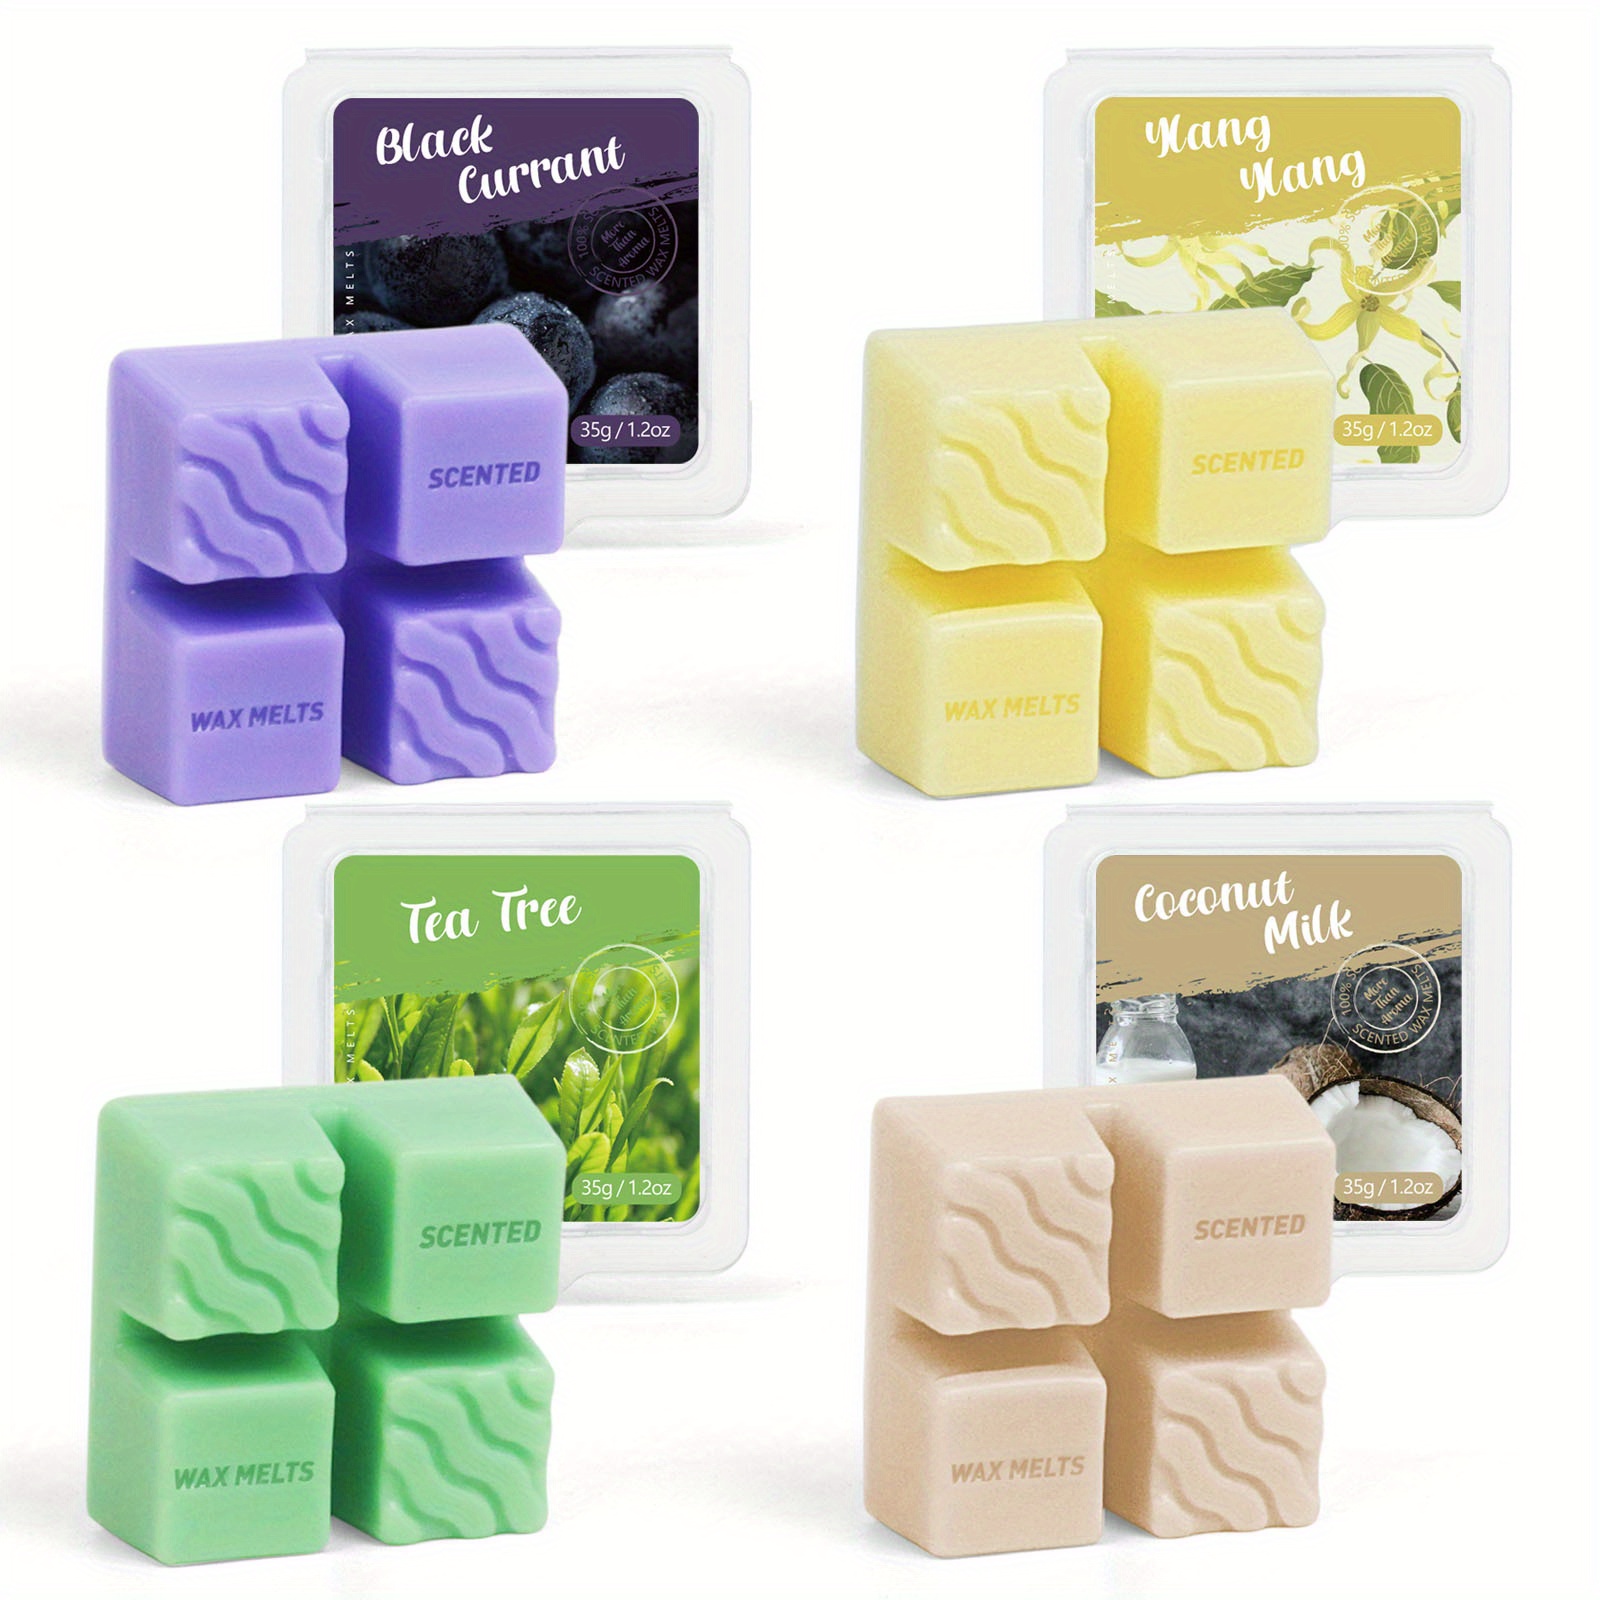 Symkmb 12 Pack Scented Wax Melts Wax Square, Scented Wax Melts